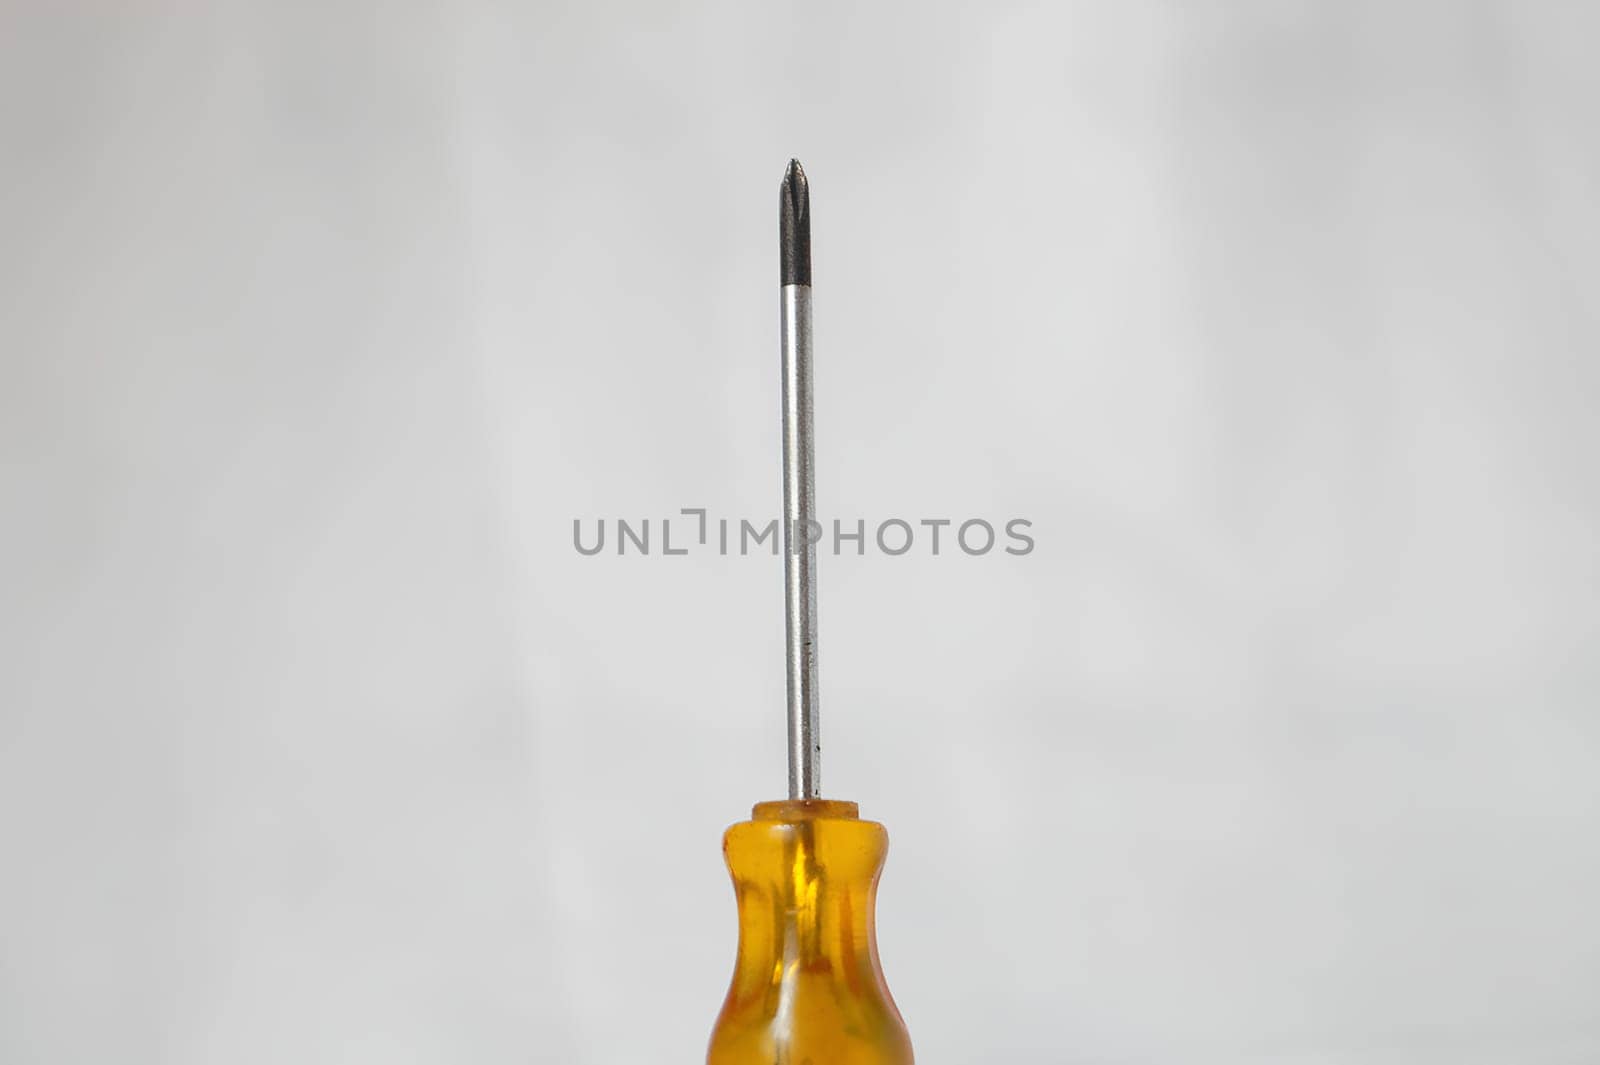 A yellow screwdriver with a silver tip. High quality photo